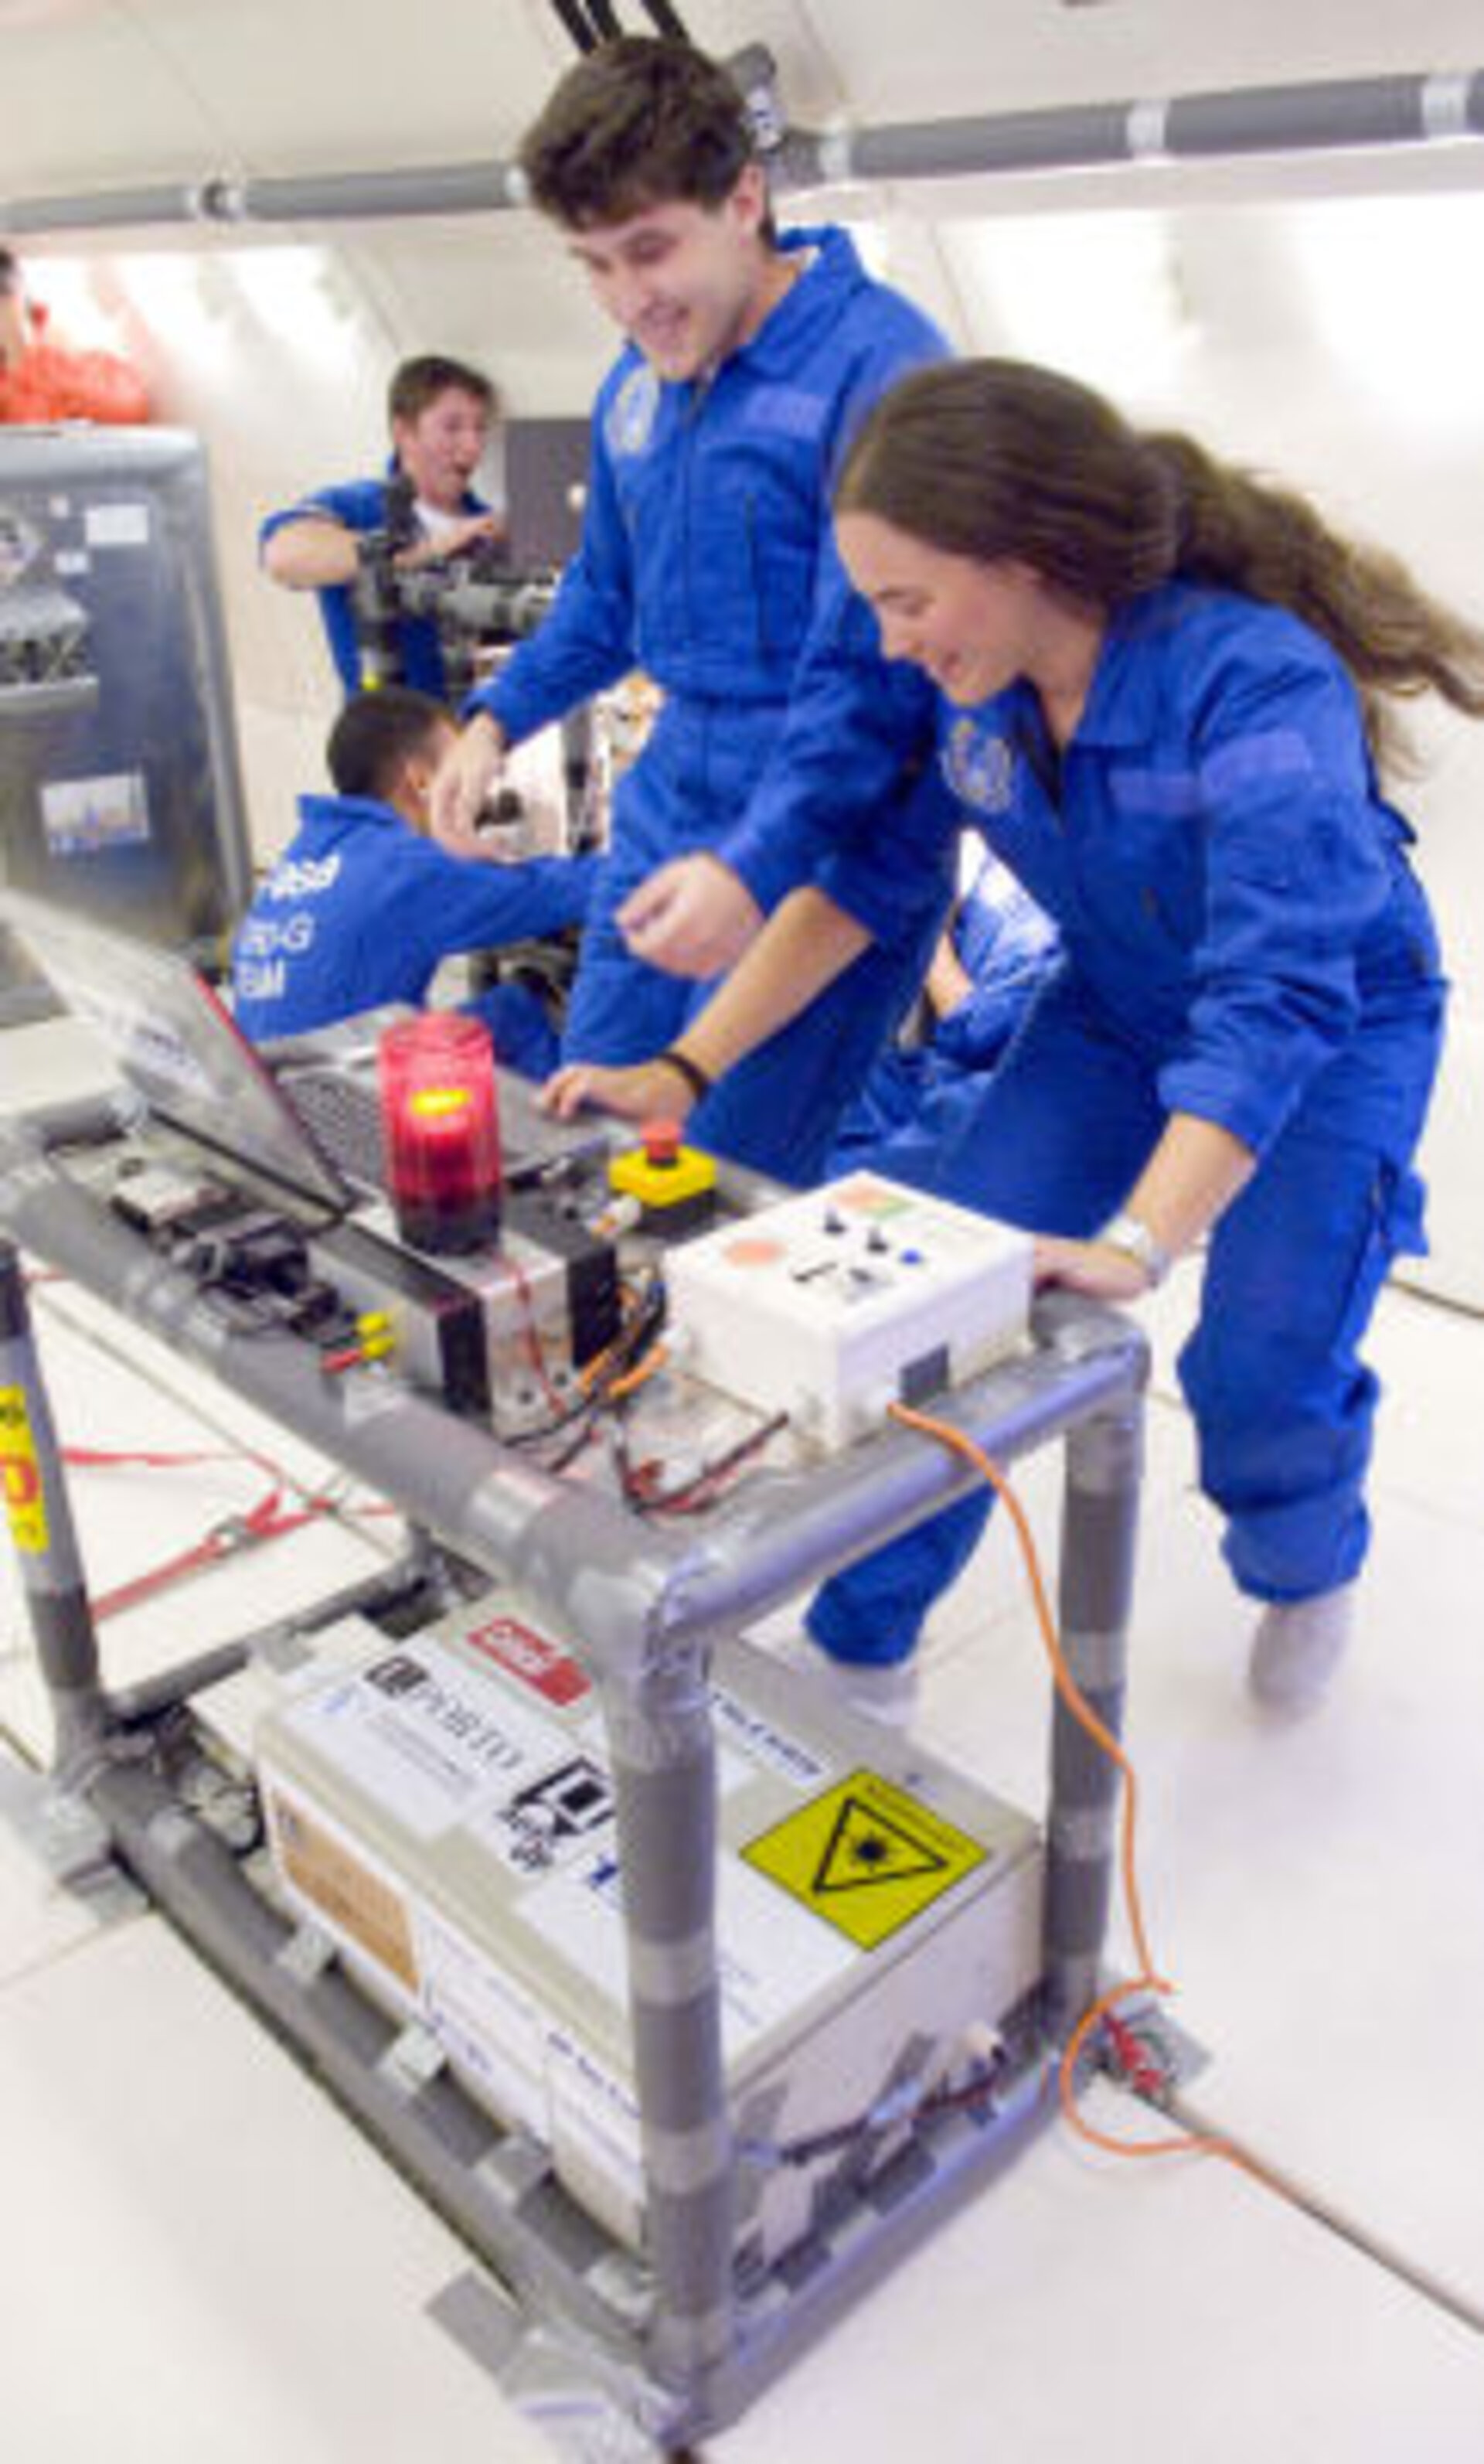 Students performing an experiment in Zero G